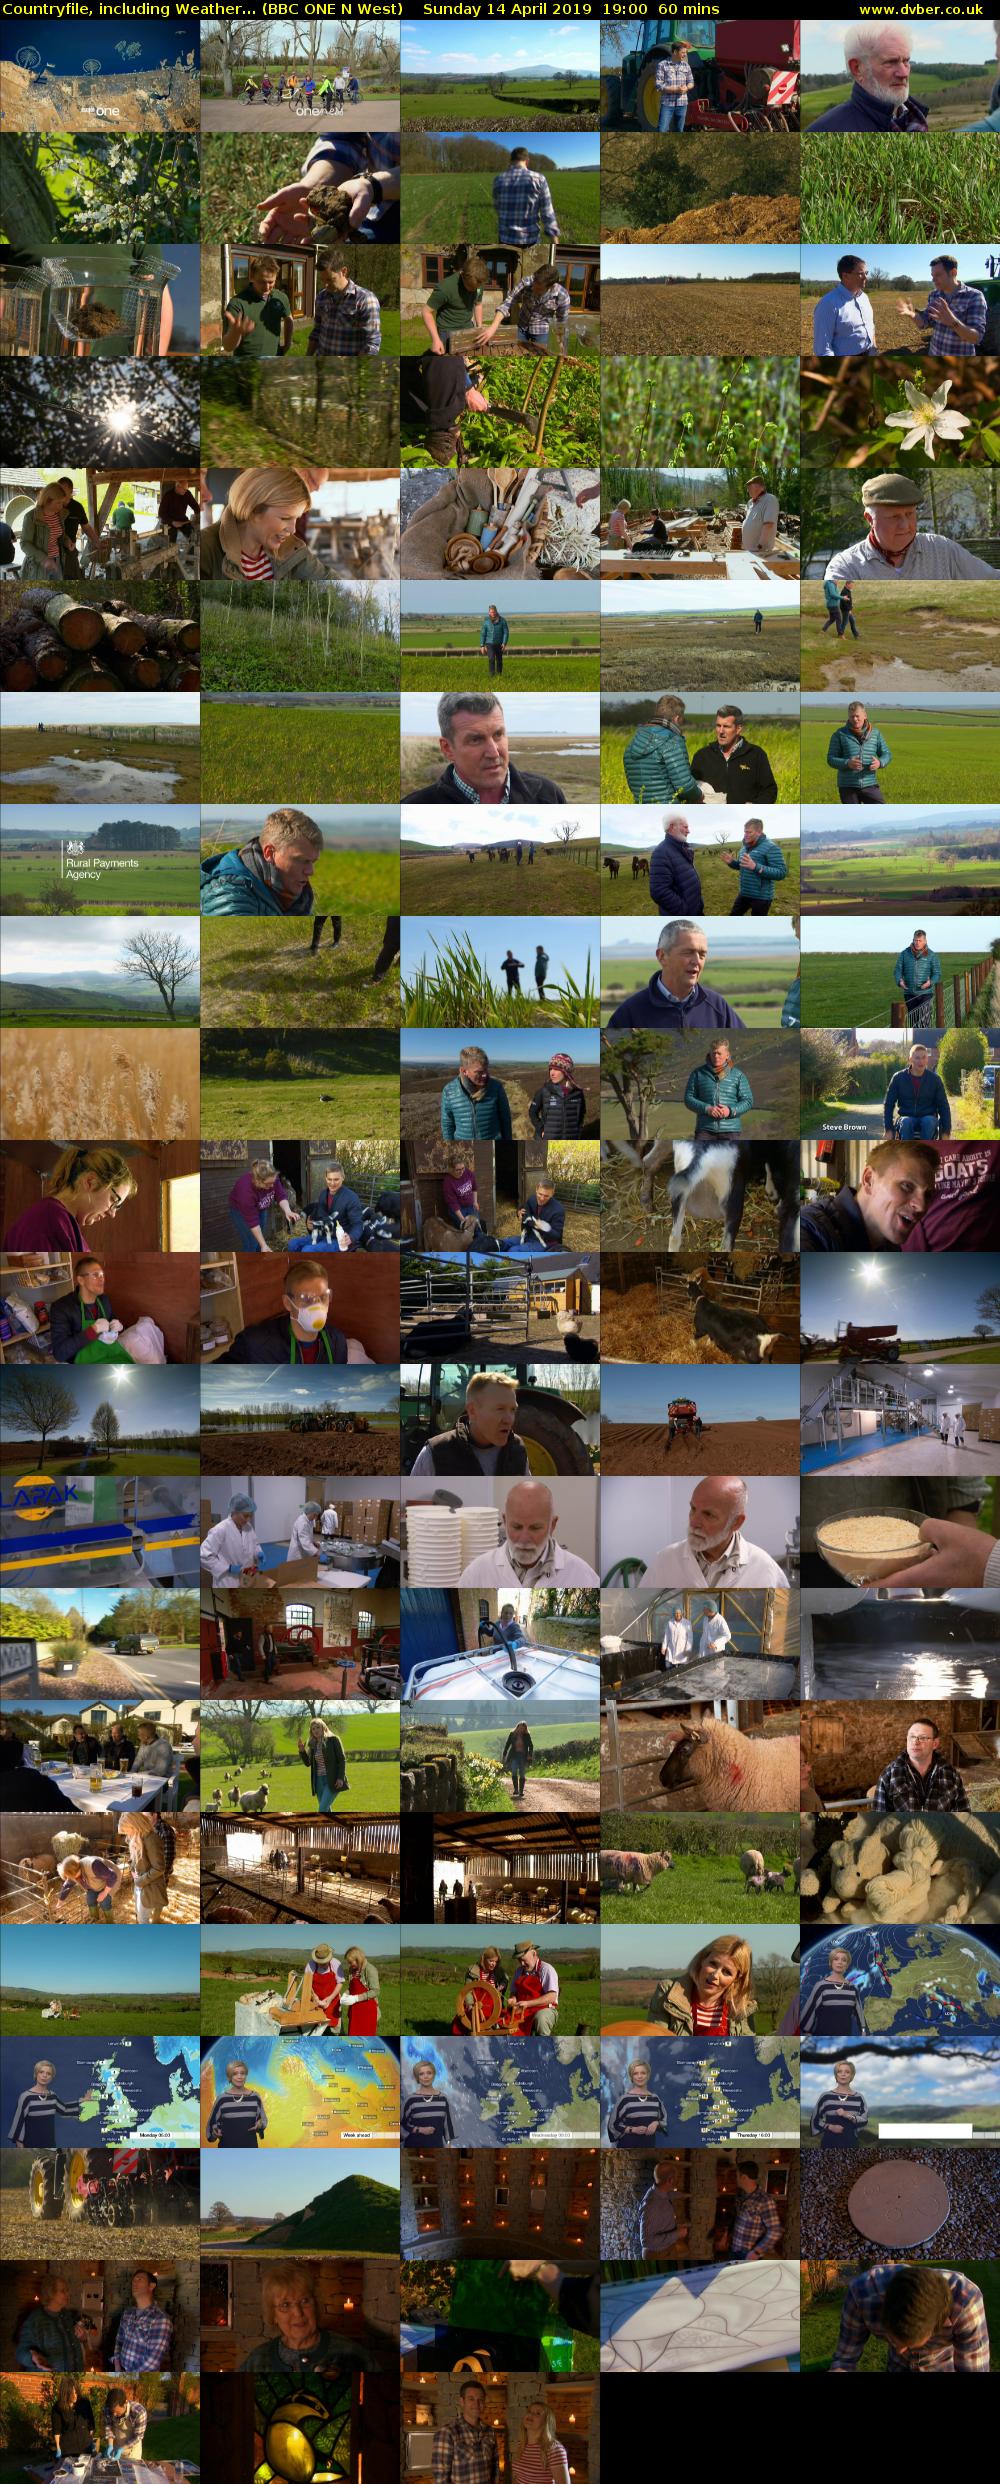 Countryfile, including Weather... (BBC ONE N West) Sunday 14 April 2019 19:00 - 20:00